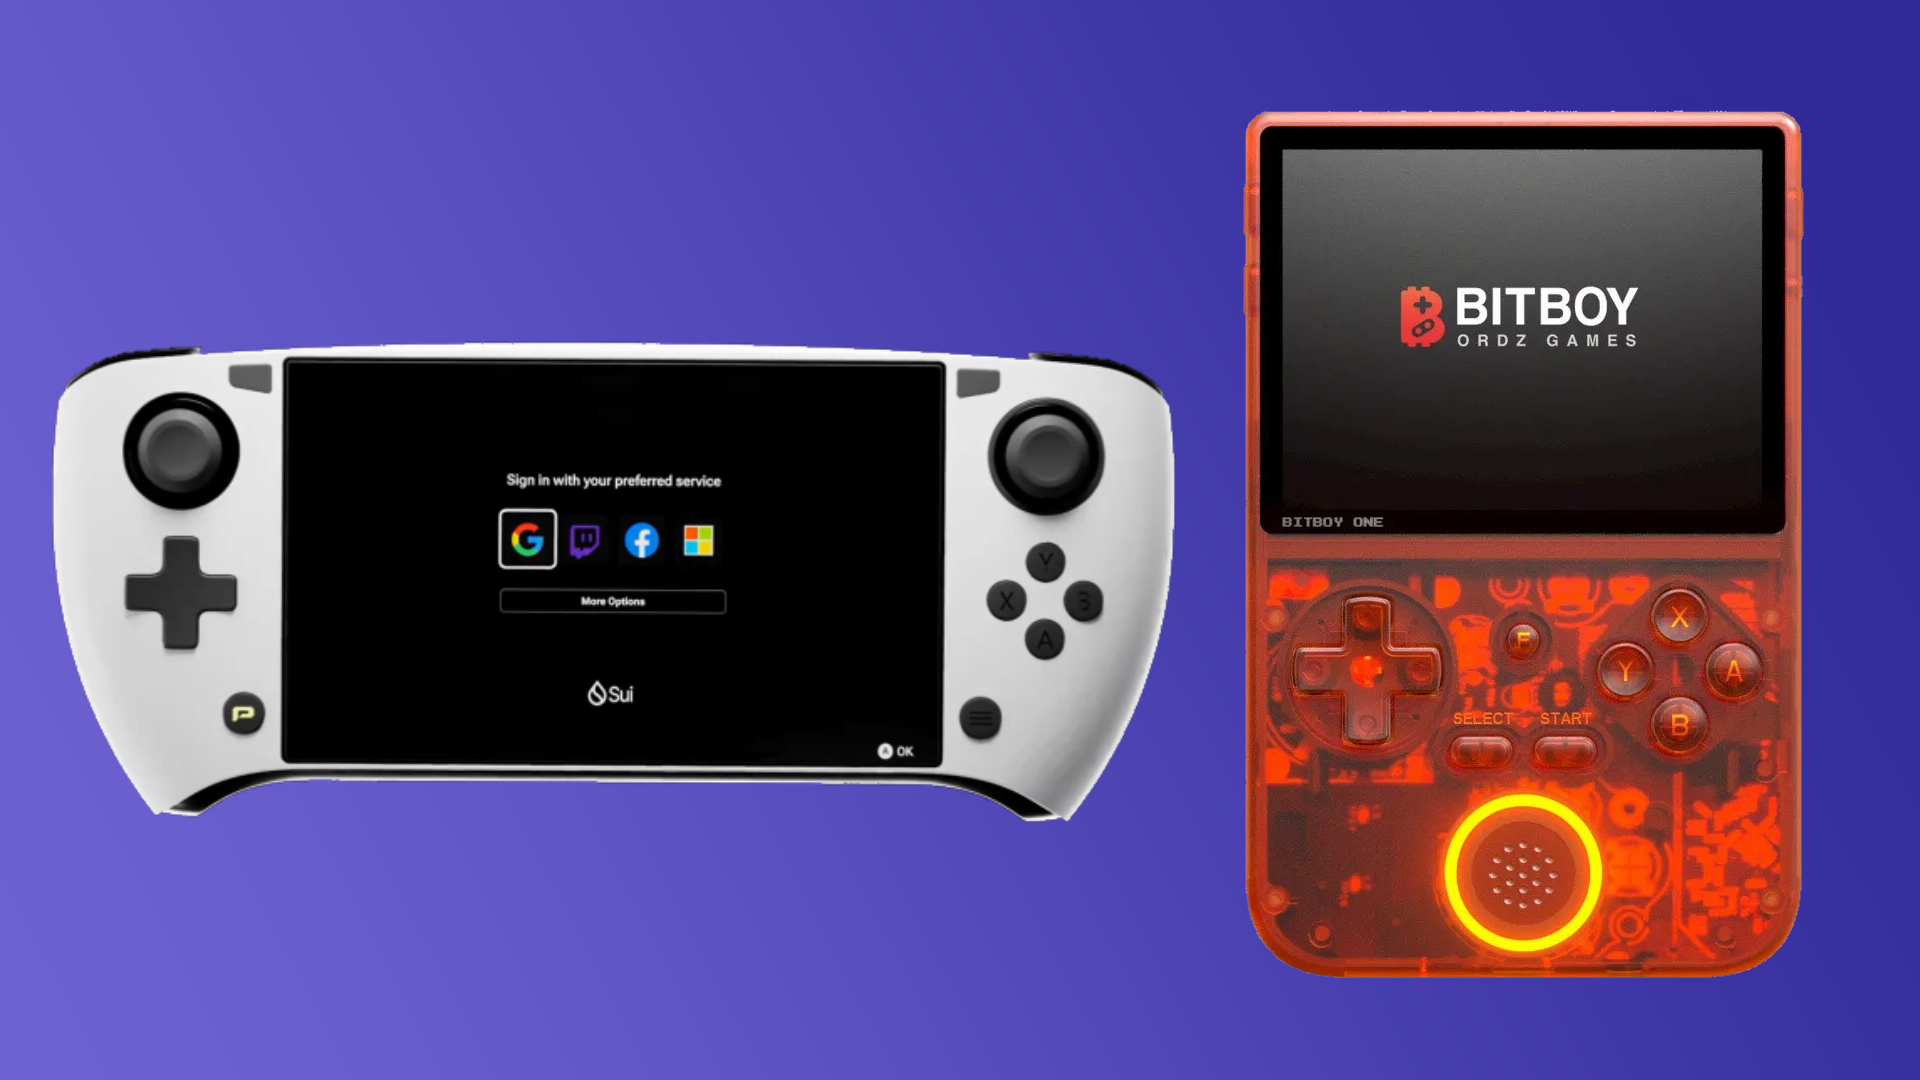 These two crypto-integrated handhelds are aiming to make Web3 gaming happen—because if it doesn’t work the first time, try, try and try again